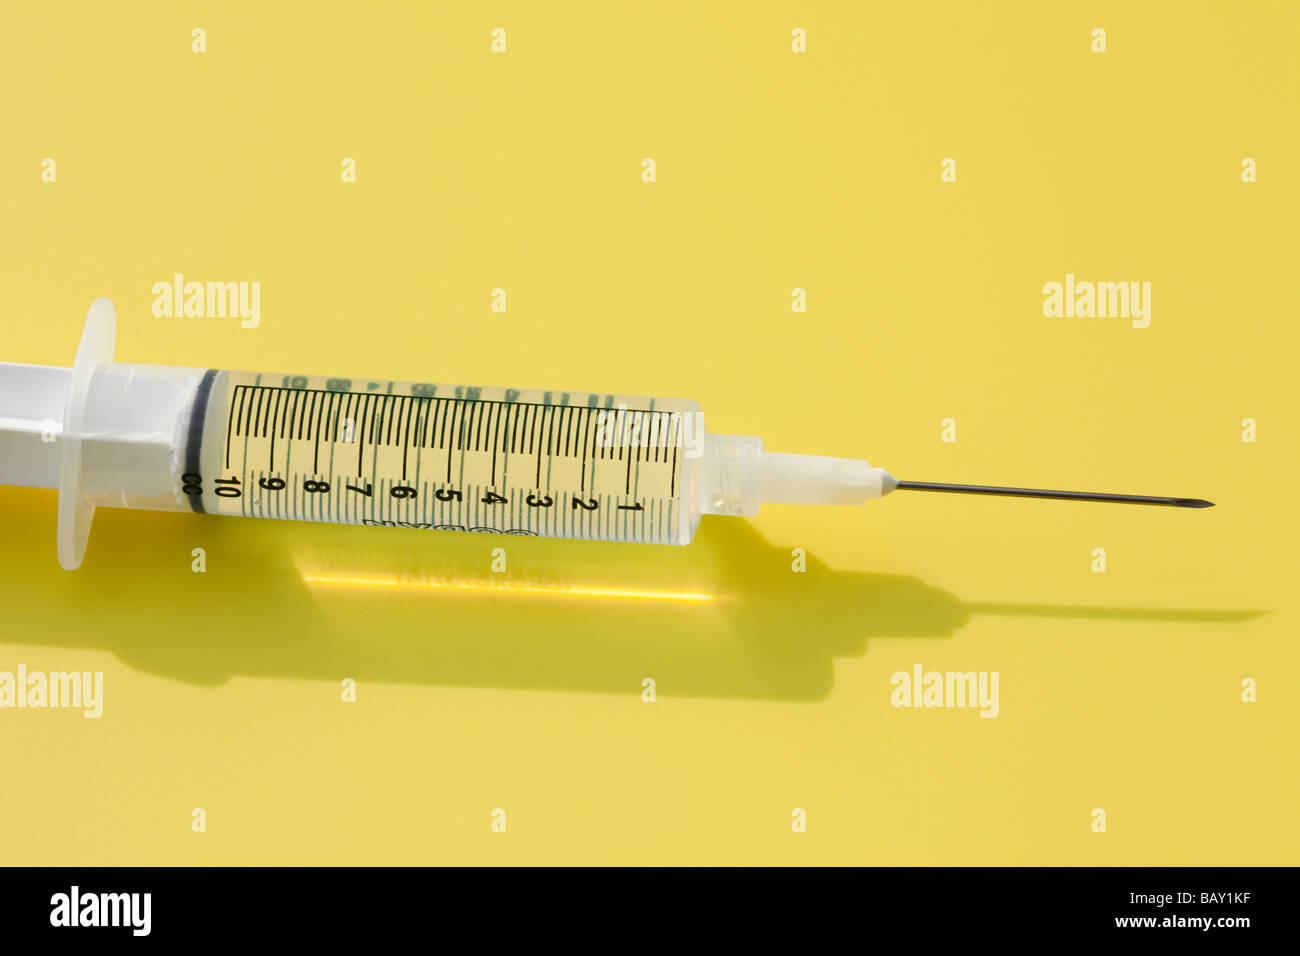 Studio still life 10 cc ml plastic syringe with needle in close up on a yellow background Stock Photo